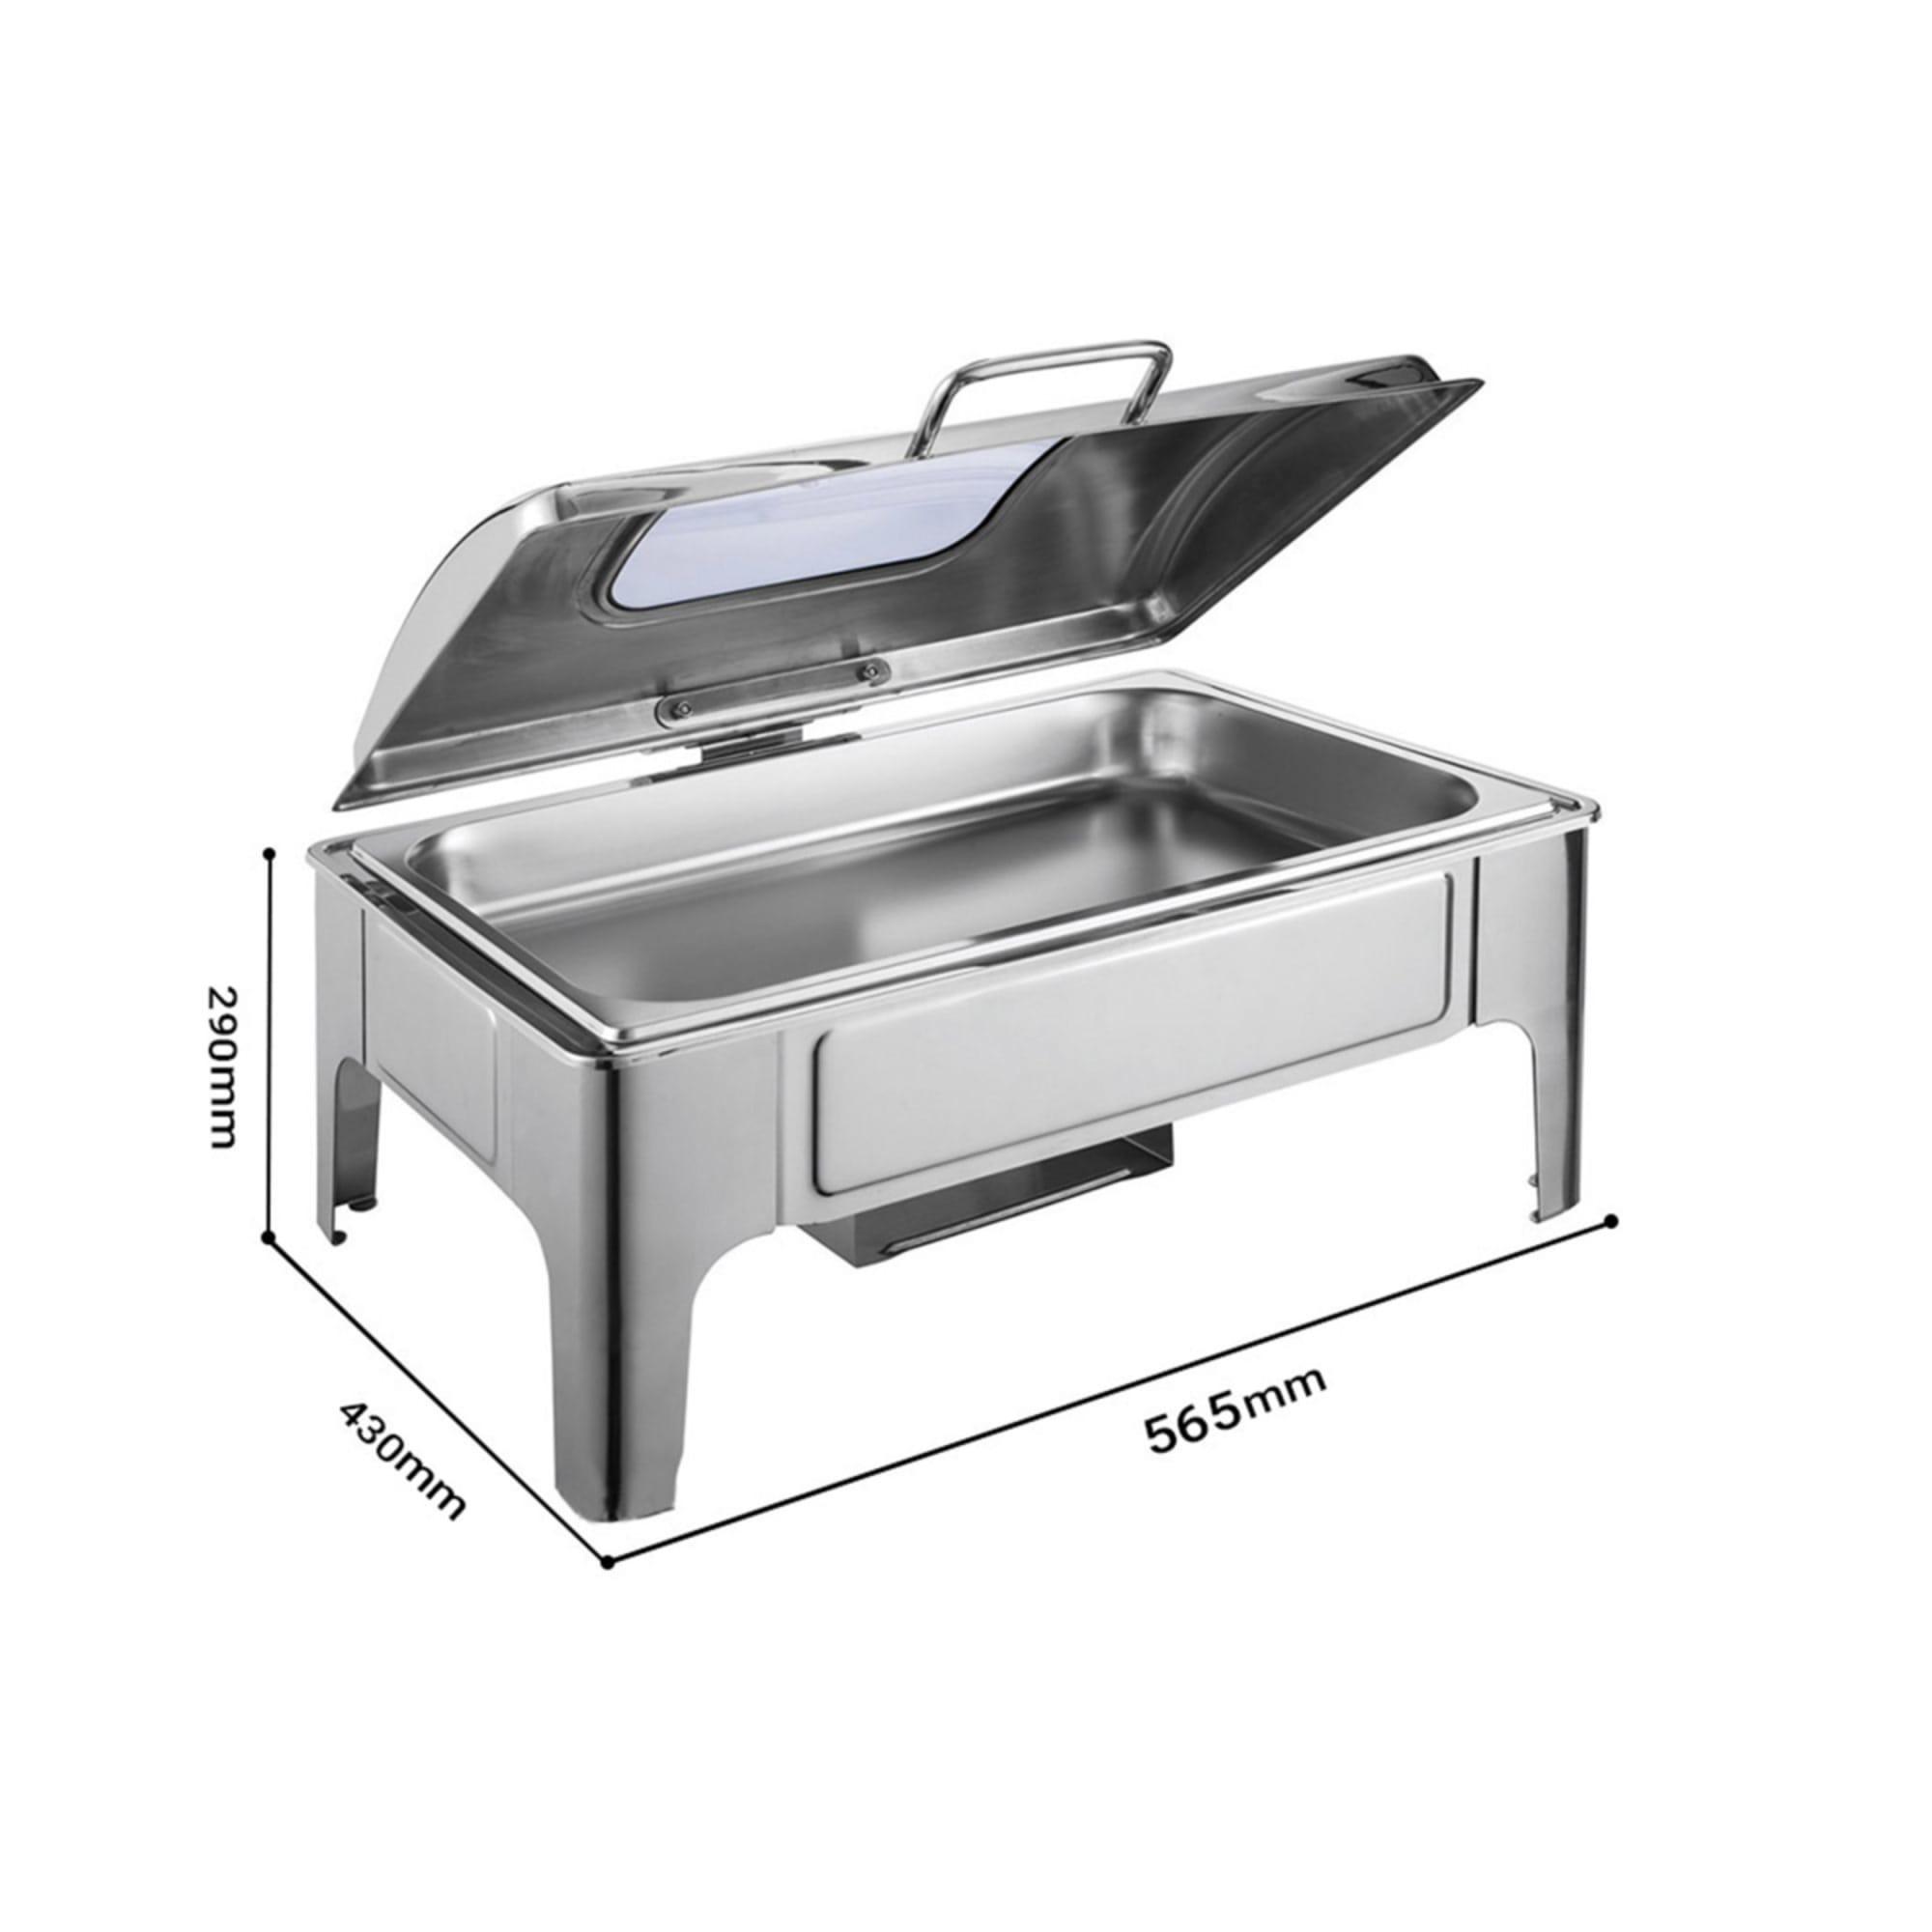 Soga Rectangular Stainless Steel Chafing Dish with Window Lid Set of 2 Image 8